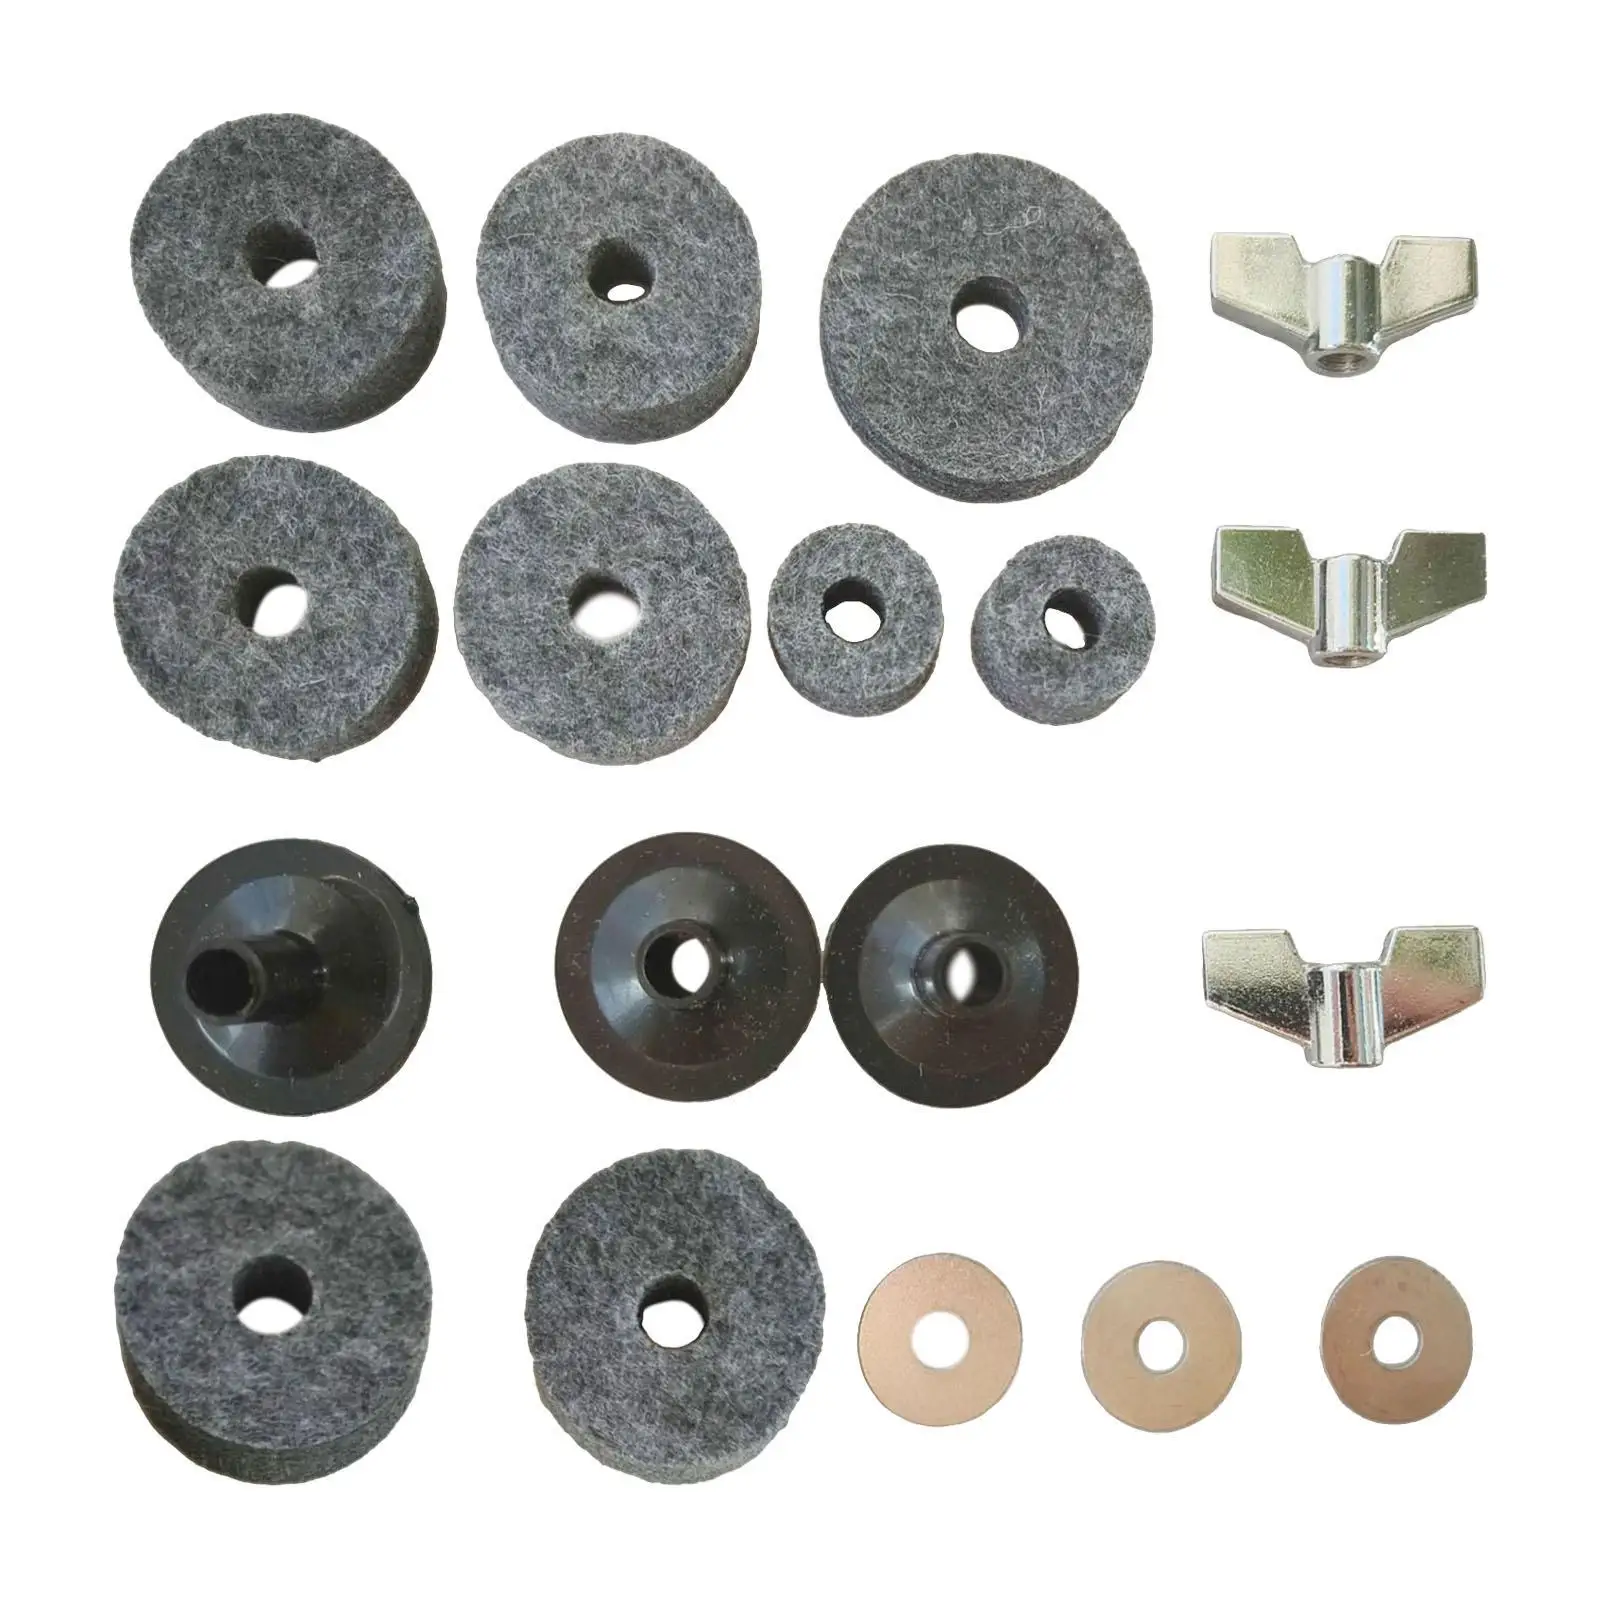 Cymbal Replacement Accessories, Drum Cymbal Felt Pads Durable Drum Keys for Drum Set, Cymbal Felts Kits Cymbal Stand Felts